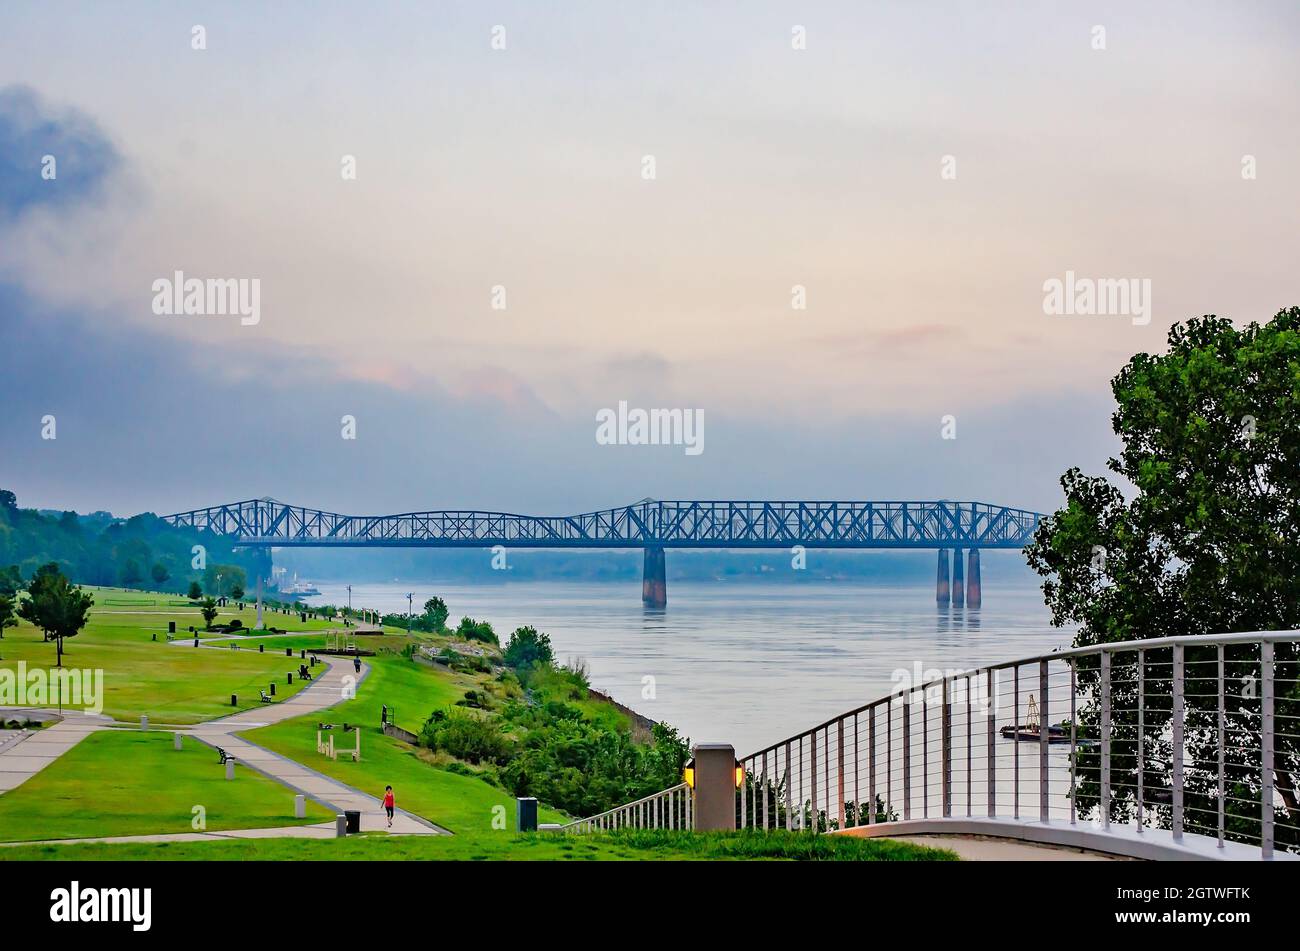 Tom Lee Park is pictured from Beale Street Landing, Sept. 10, 2015, in Memphis, Tennessee. Tom Lee Park is a 30-acre city park. Stock Photo